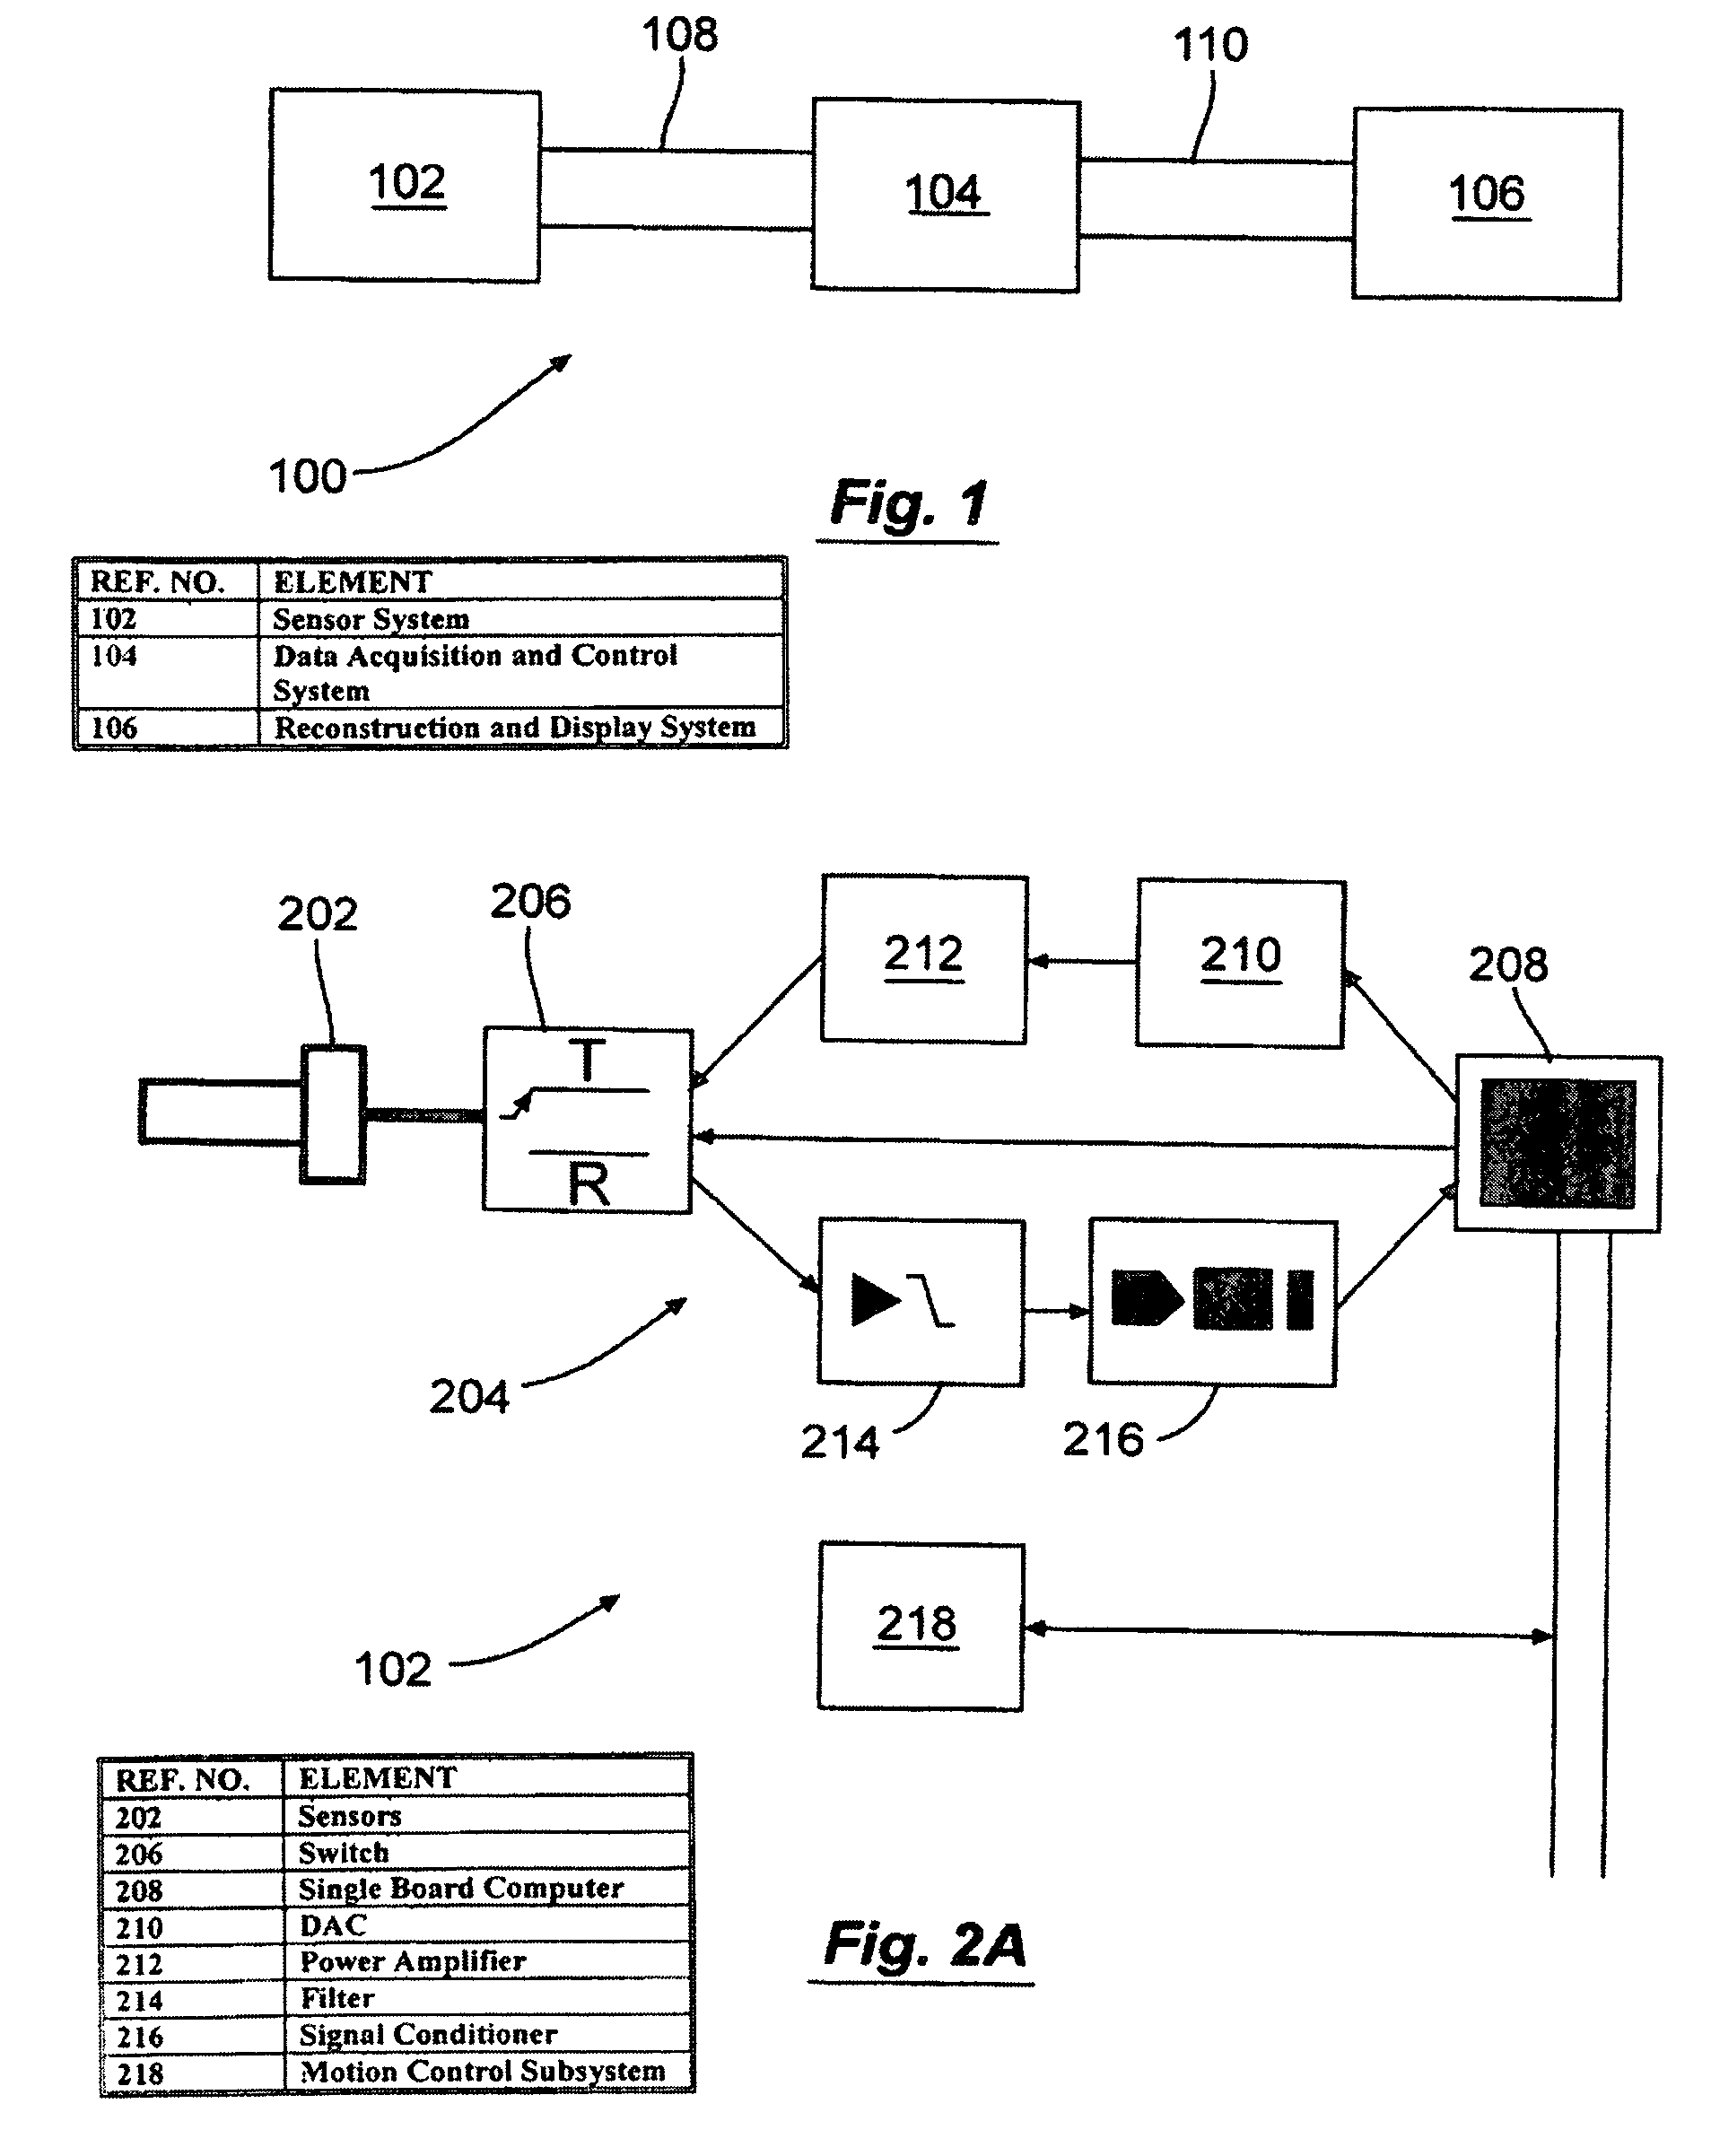 Method and apparatus for combined diagnostic and therapeutic ultrasound system incorporating noninvasive thermometry, ablation control and automation